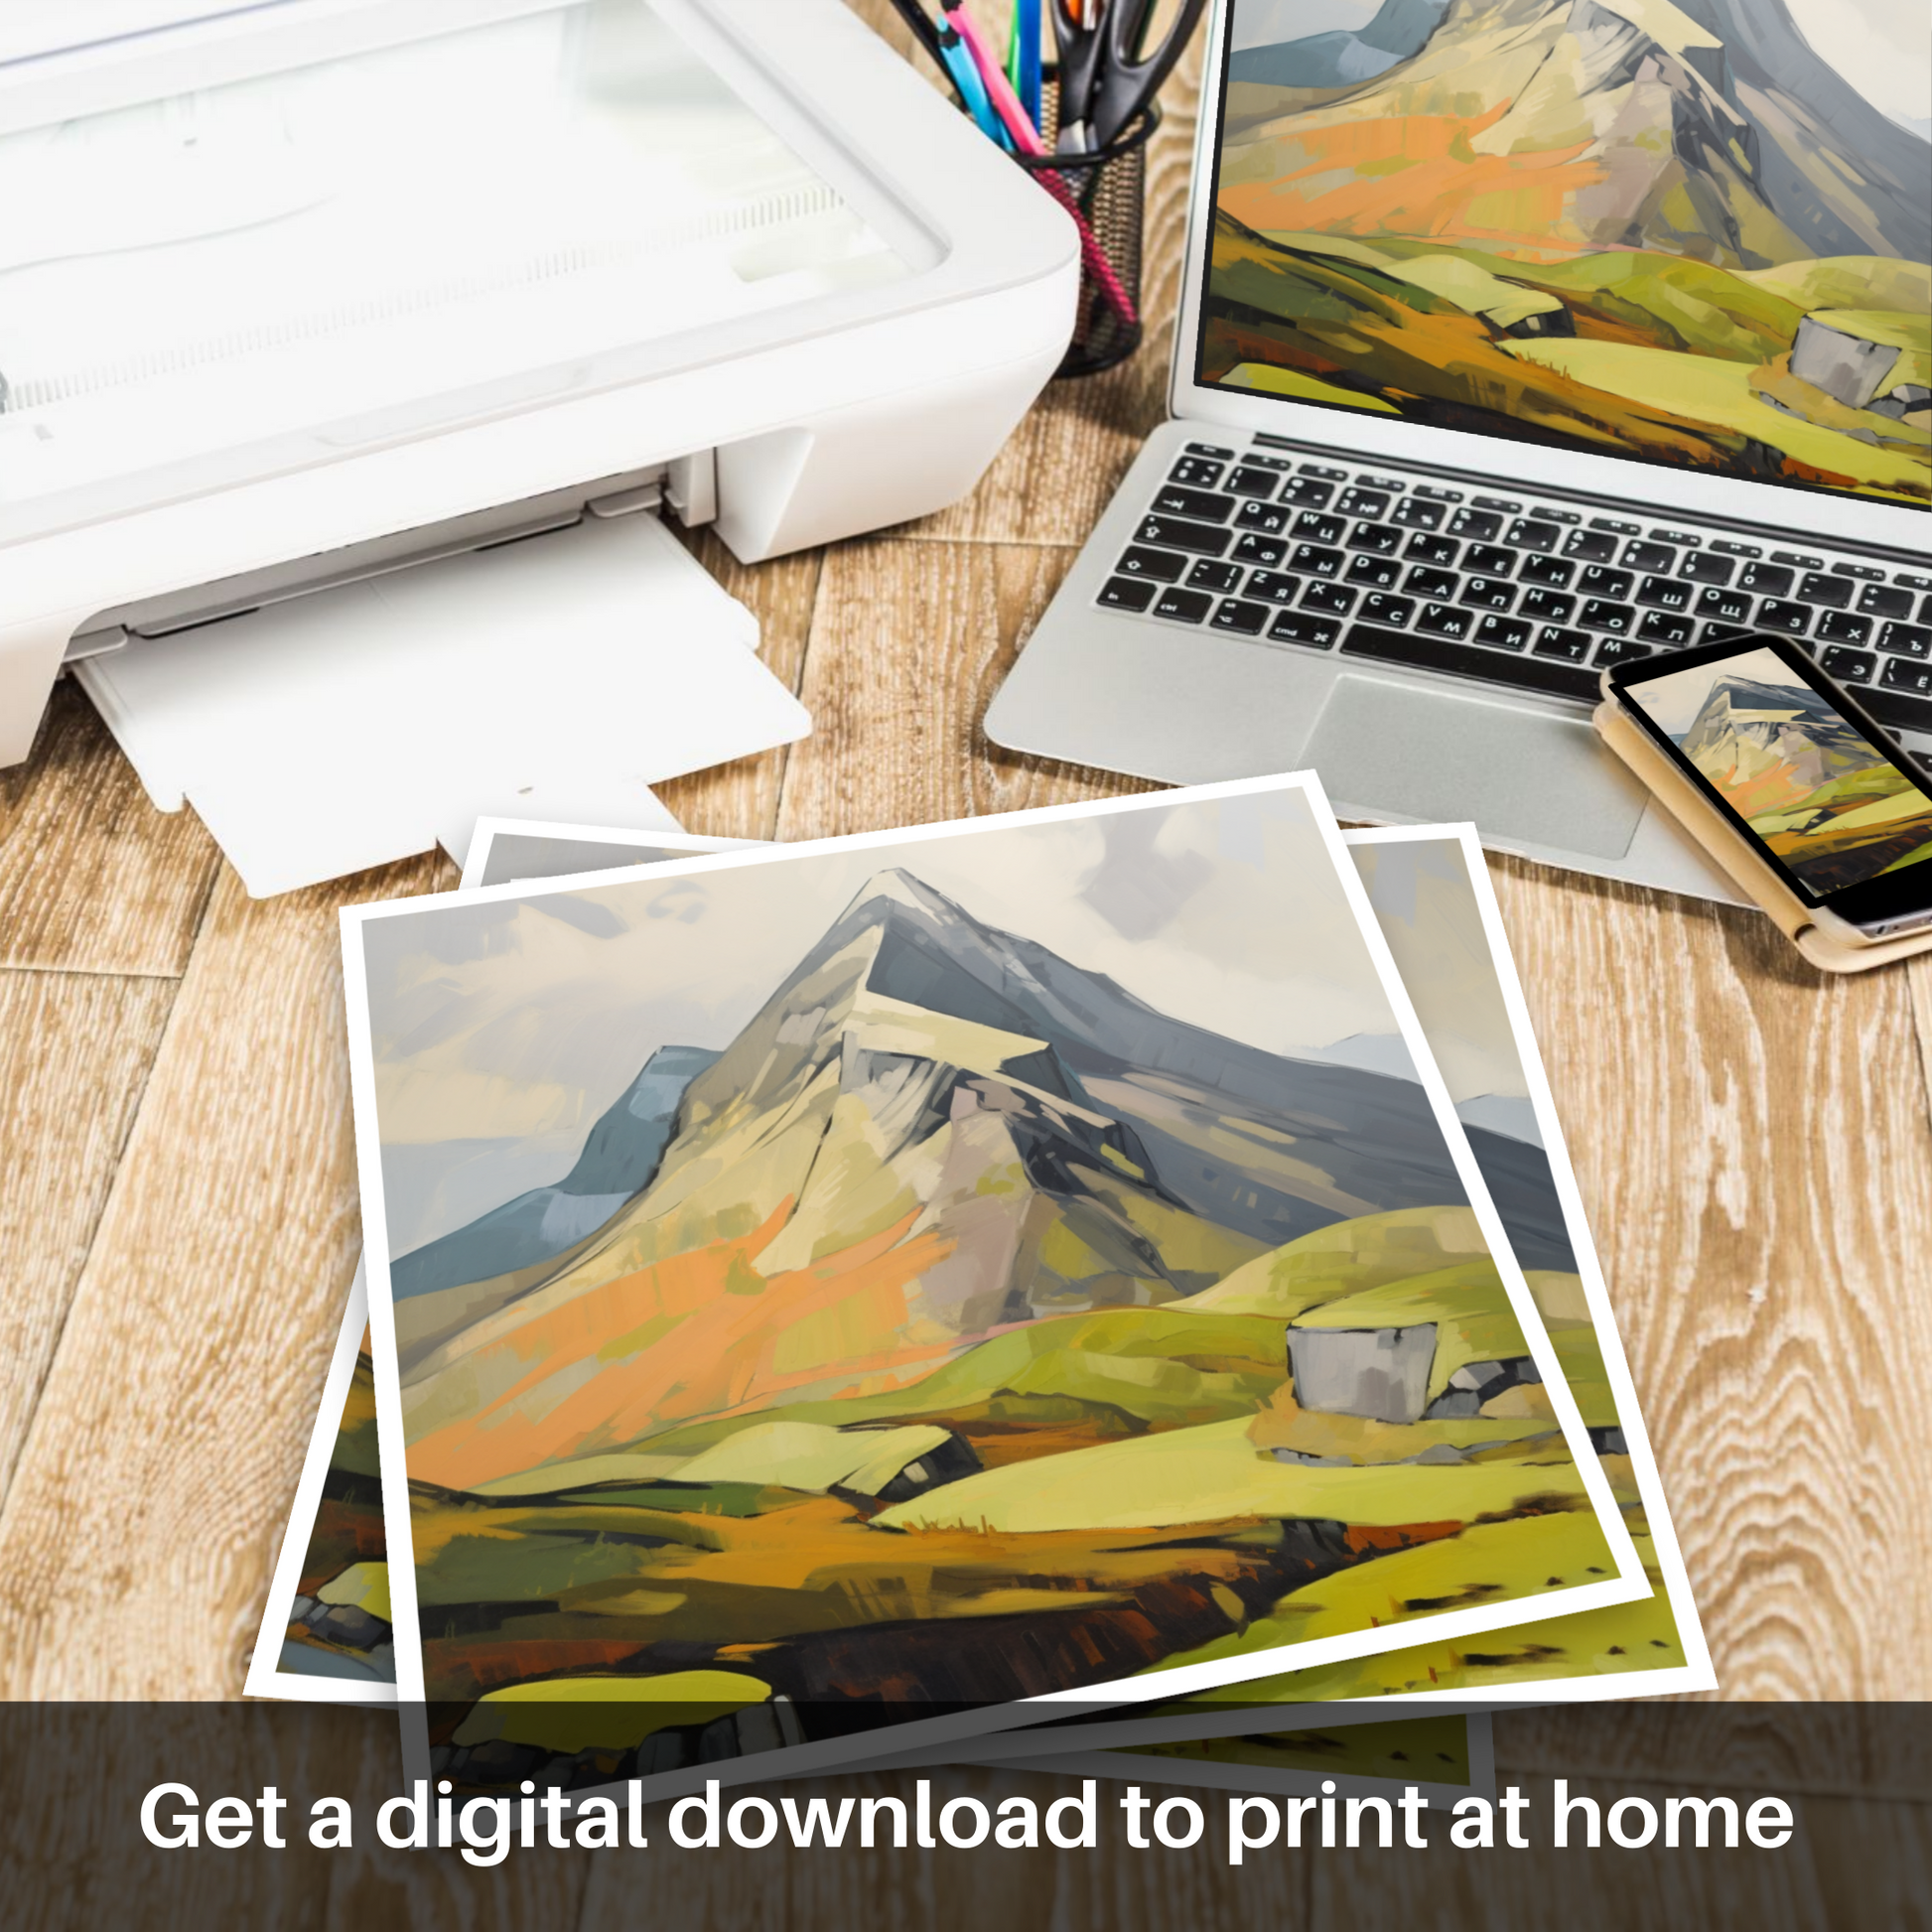 Downloadable and printable picture of A mountain in Scotland